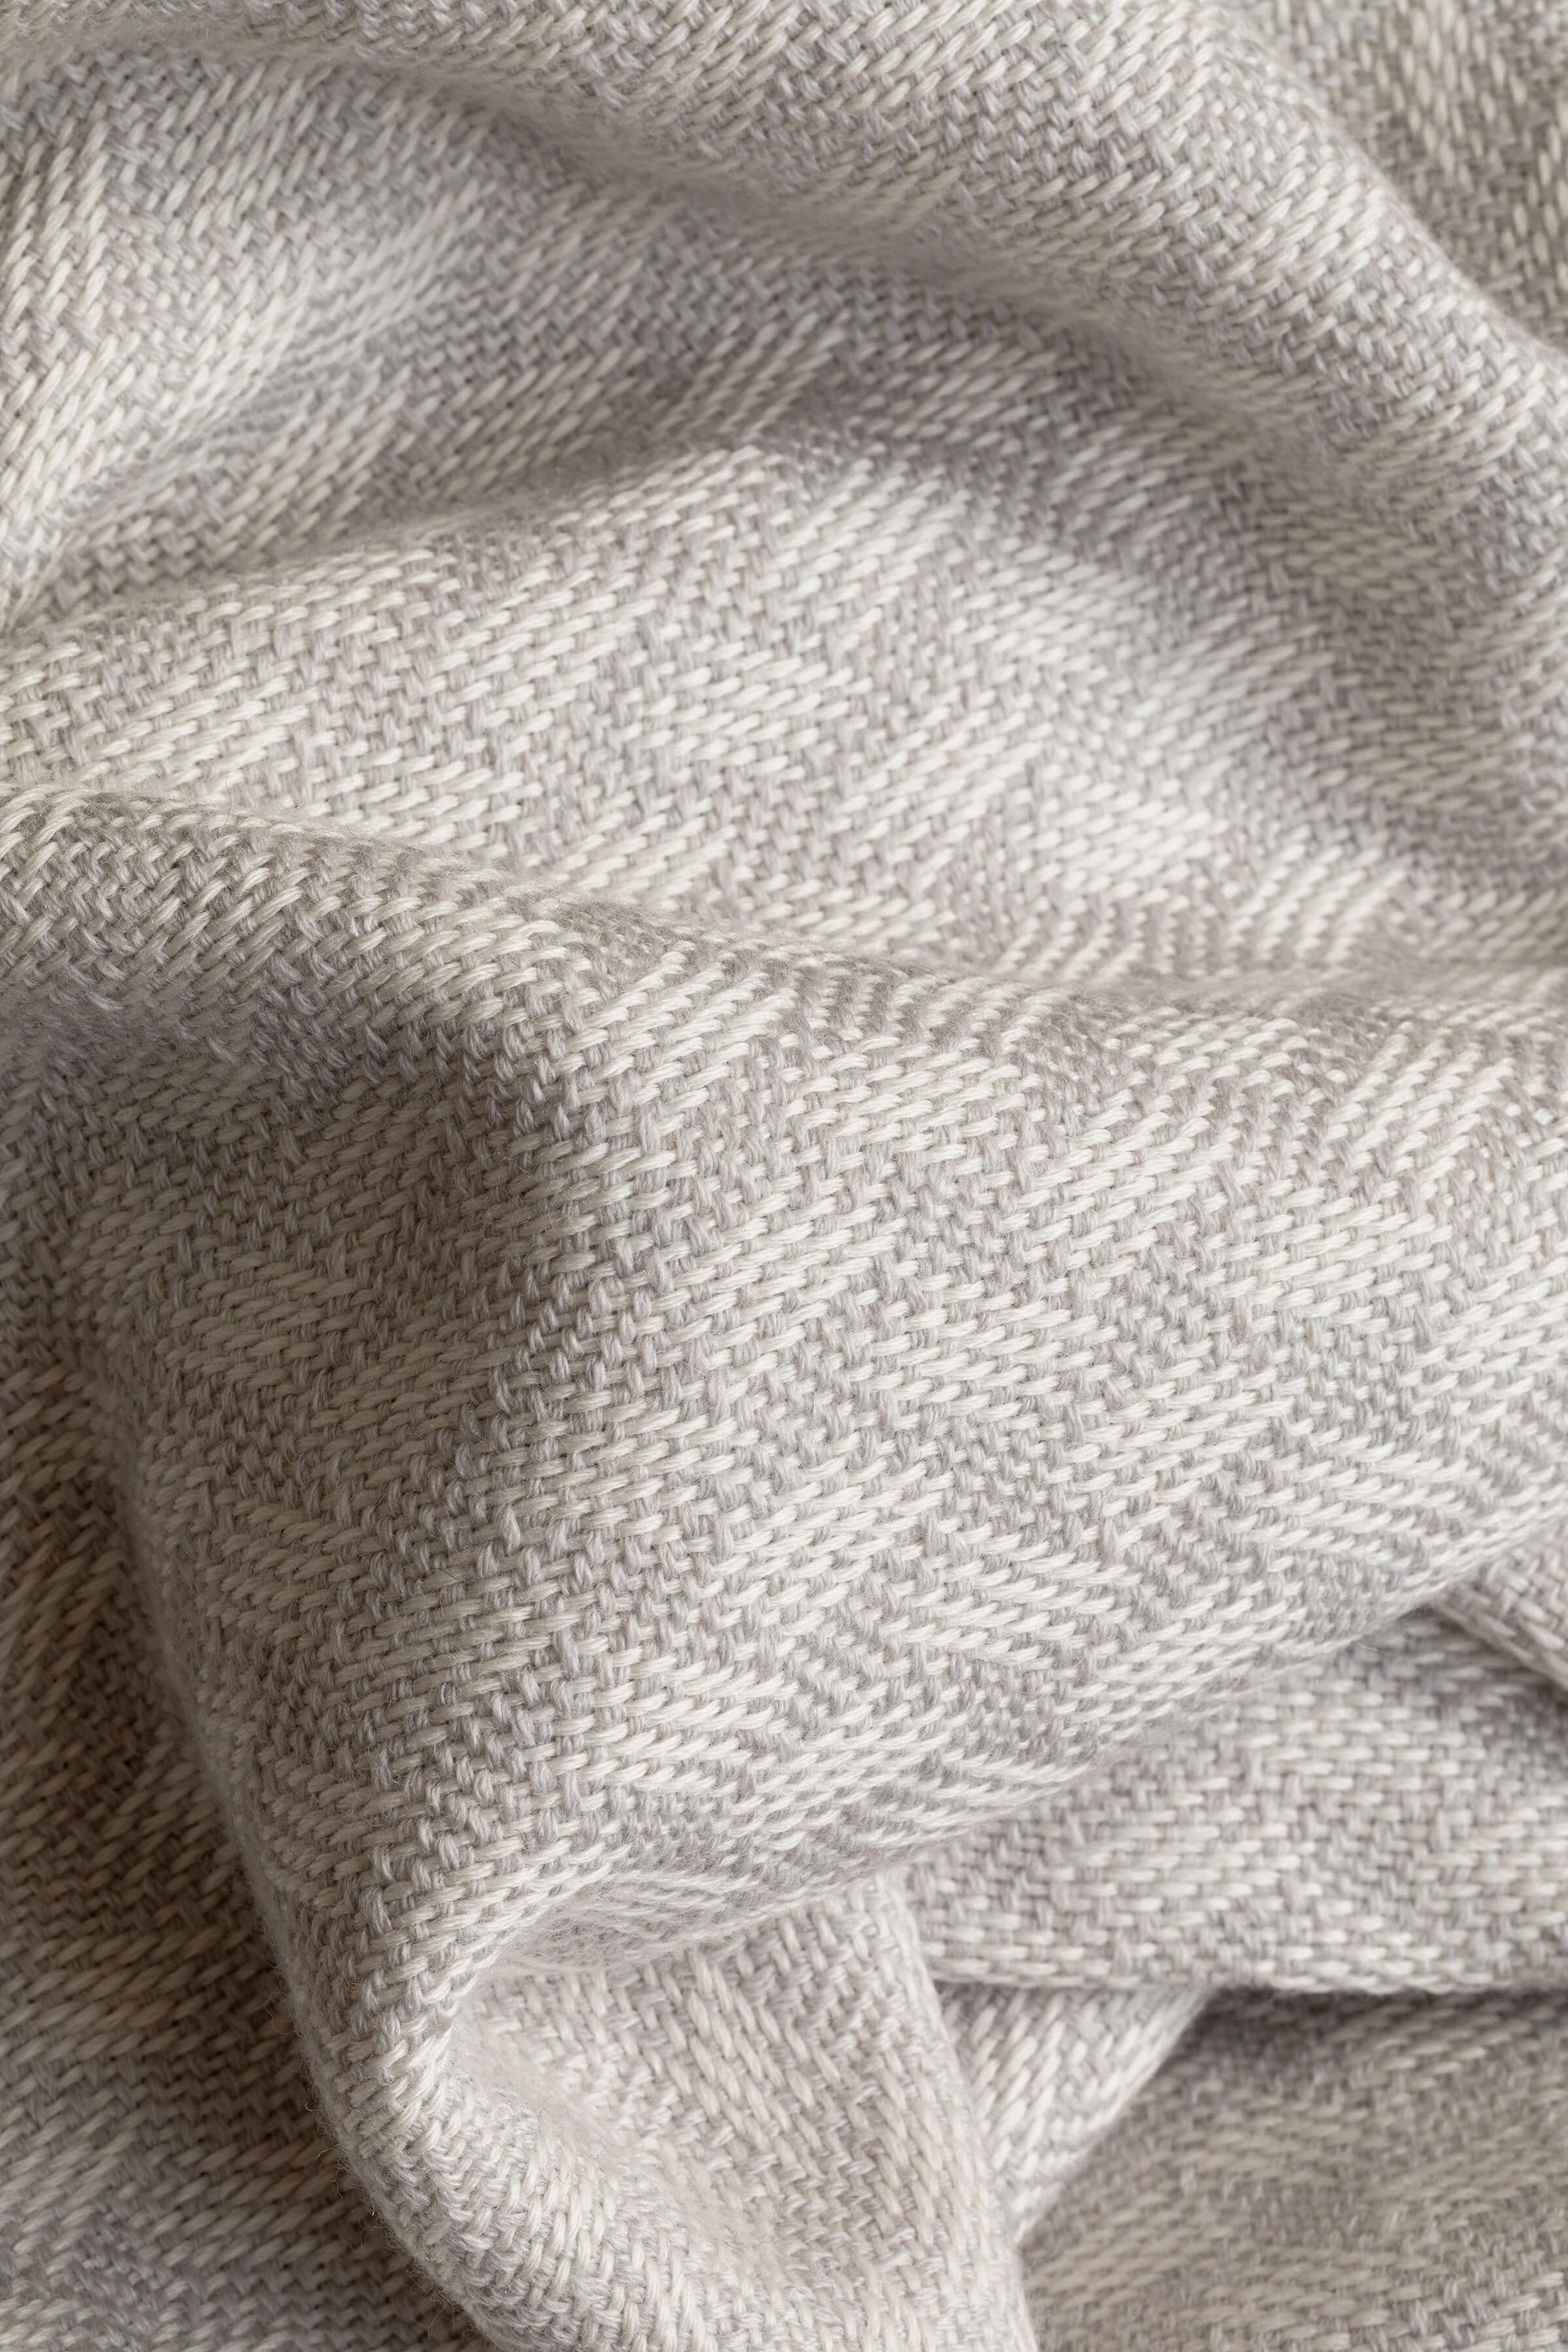 Johnstons of Elgin’s Lattice Weave Merino Bed Throw in Silver & White WD001243RU7269ONE